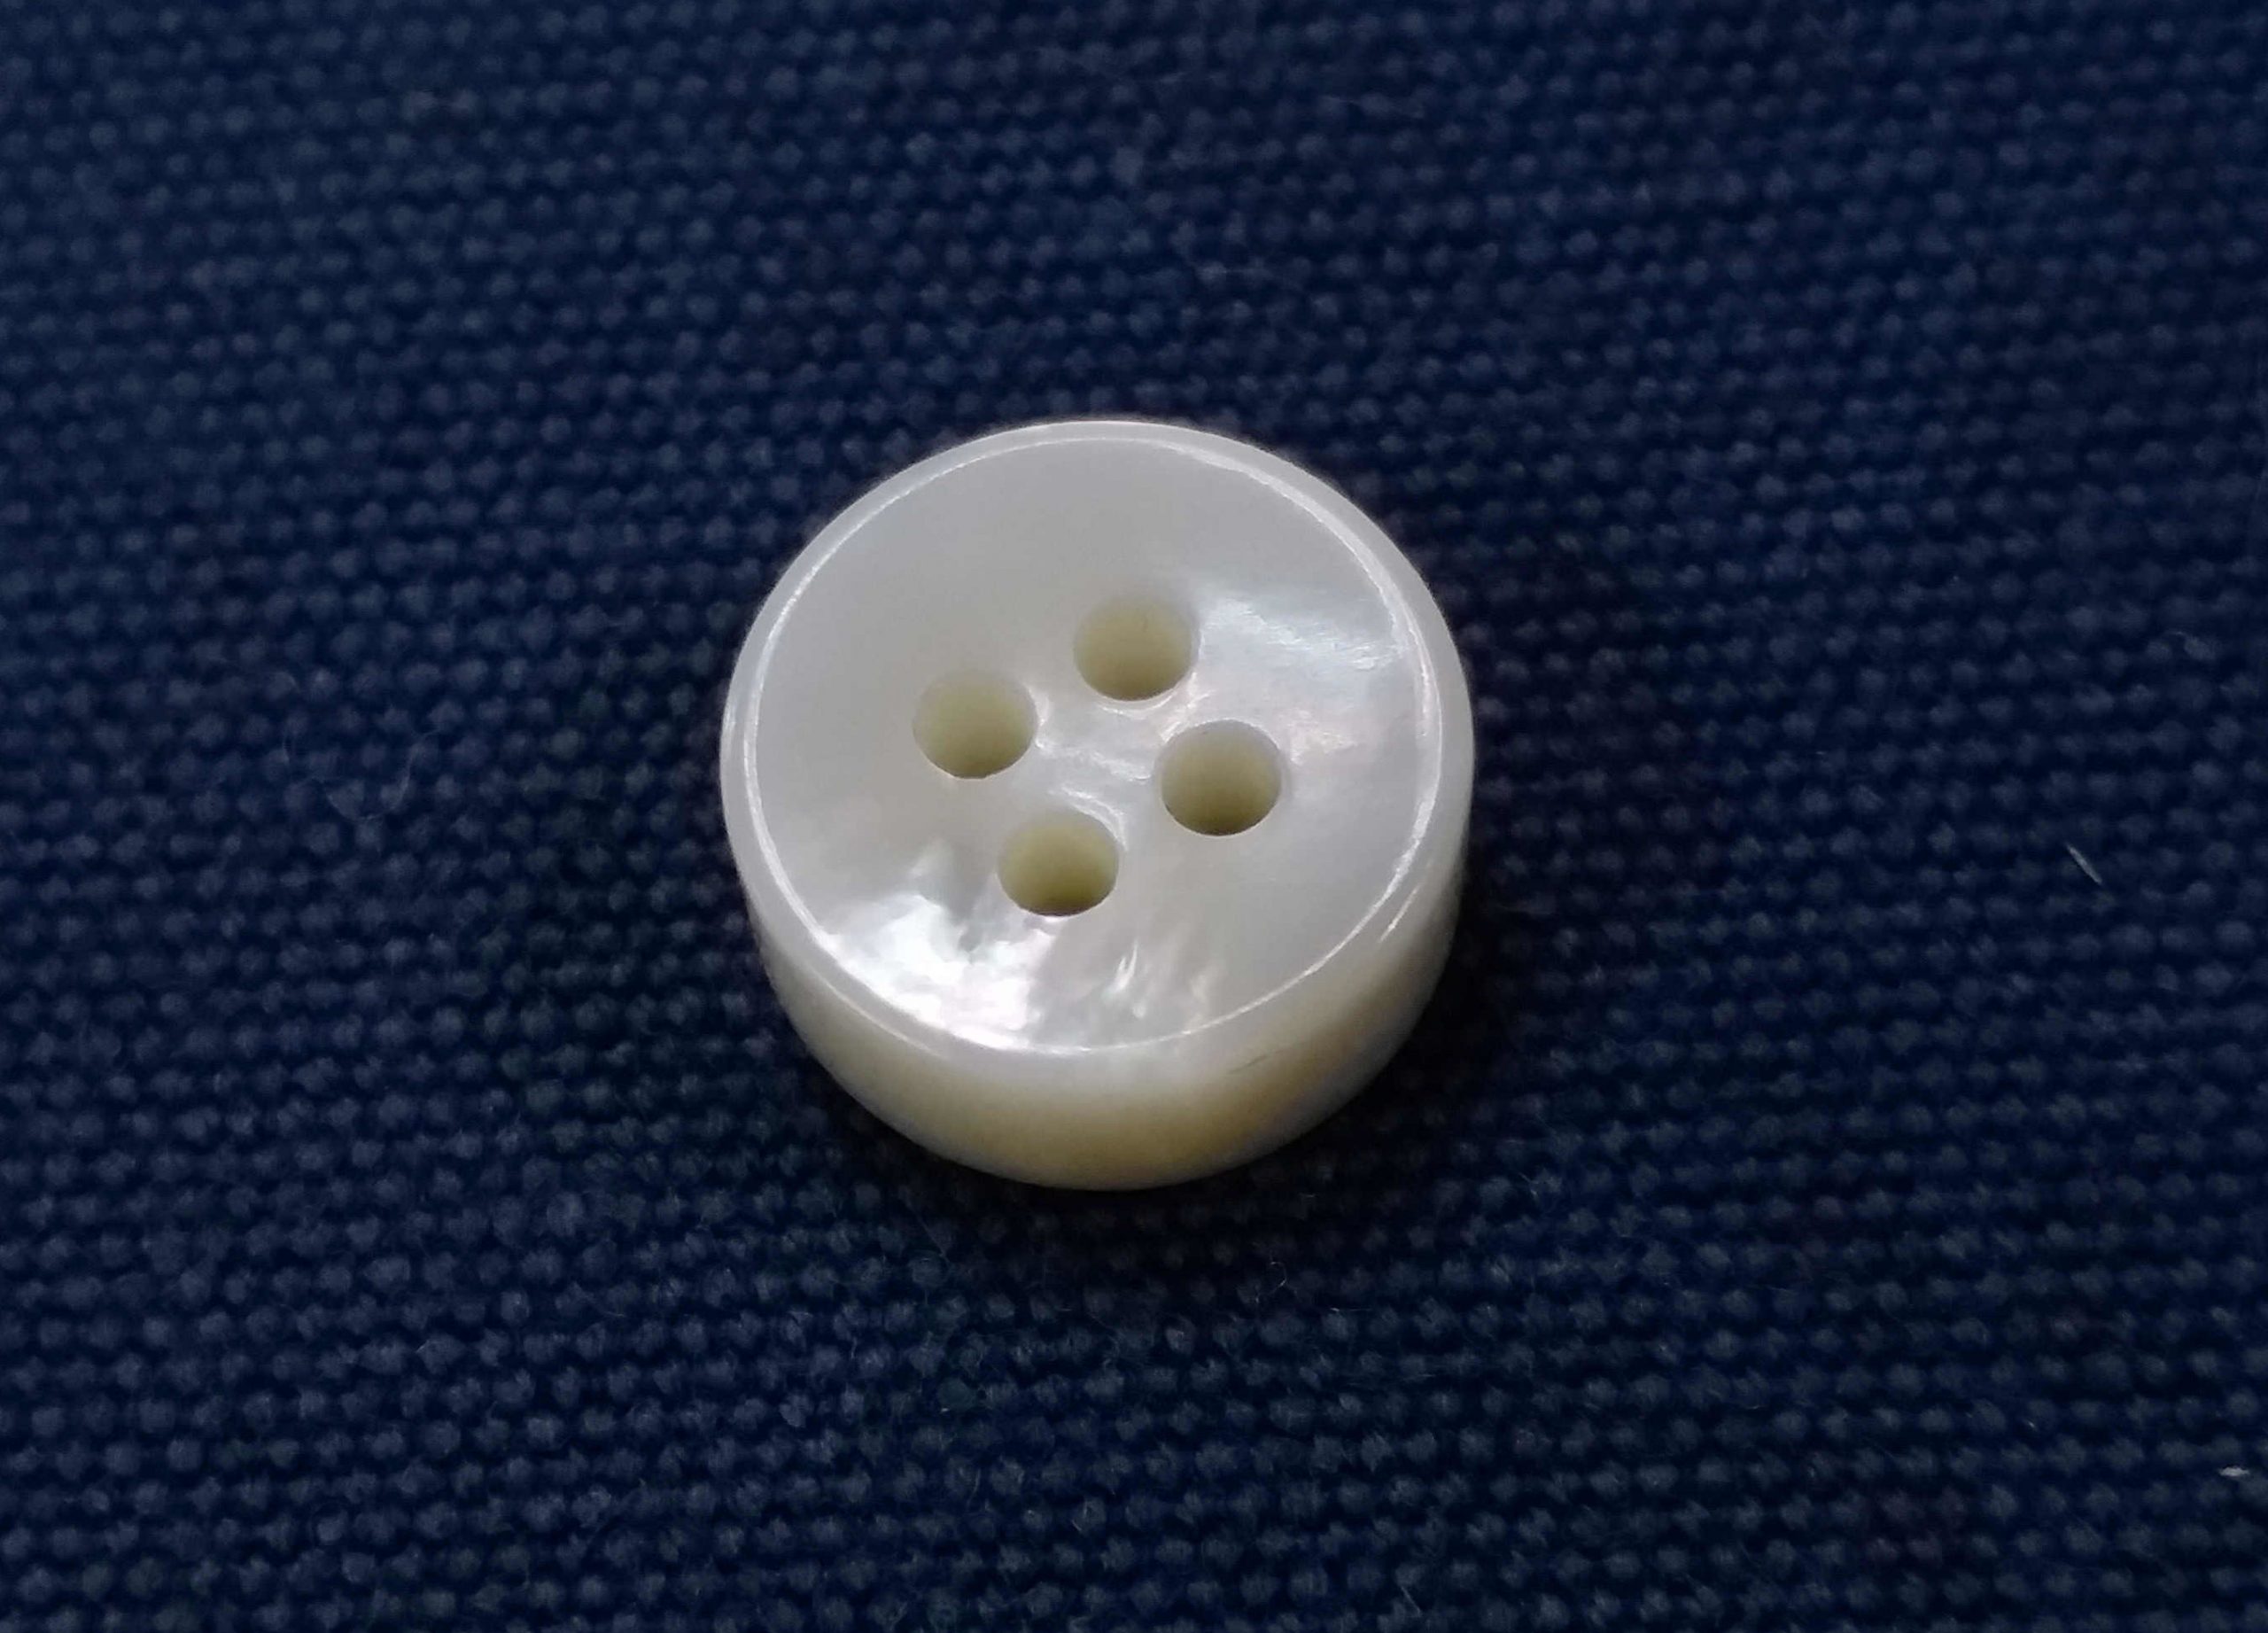 Mother of Pearl Buttons, YWBUTTON, Gents Bespoke Store